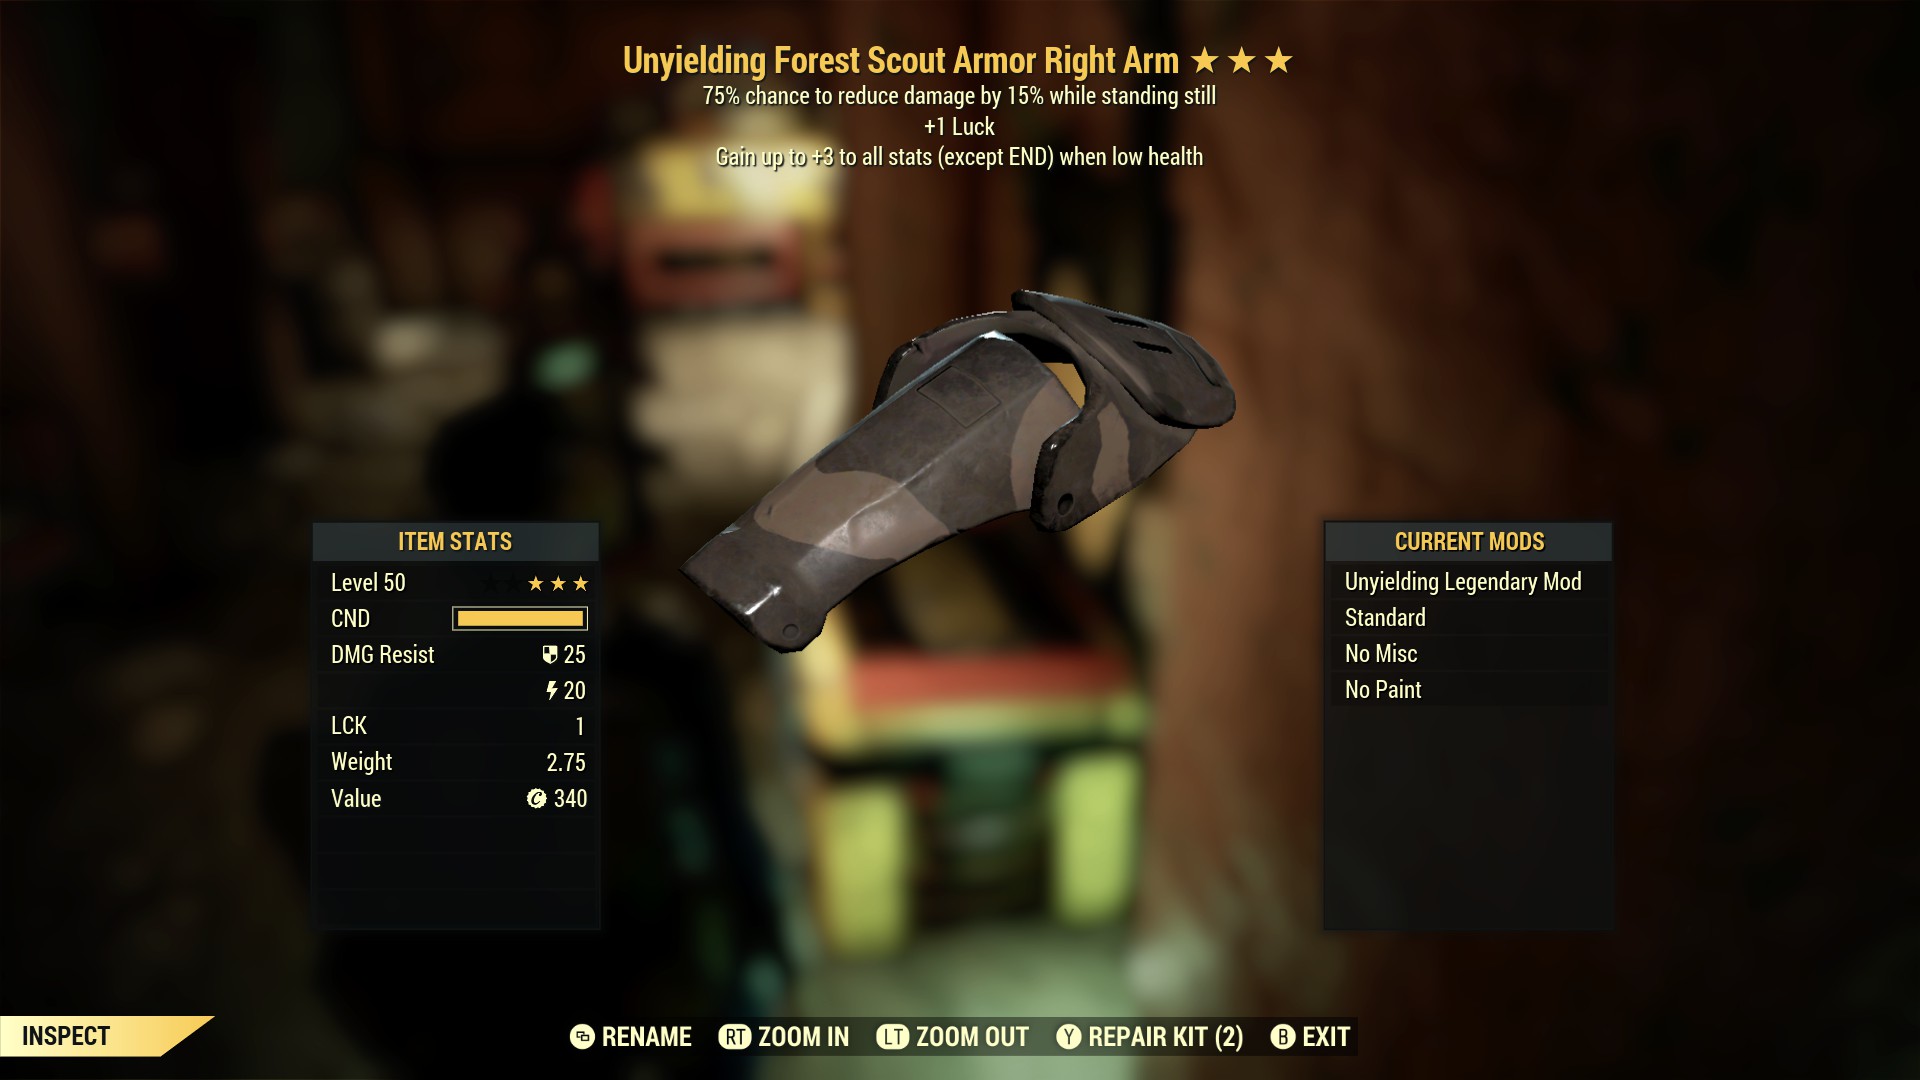 Unyielding Forest Scout Armor Right Arm